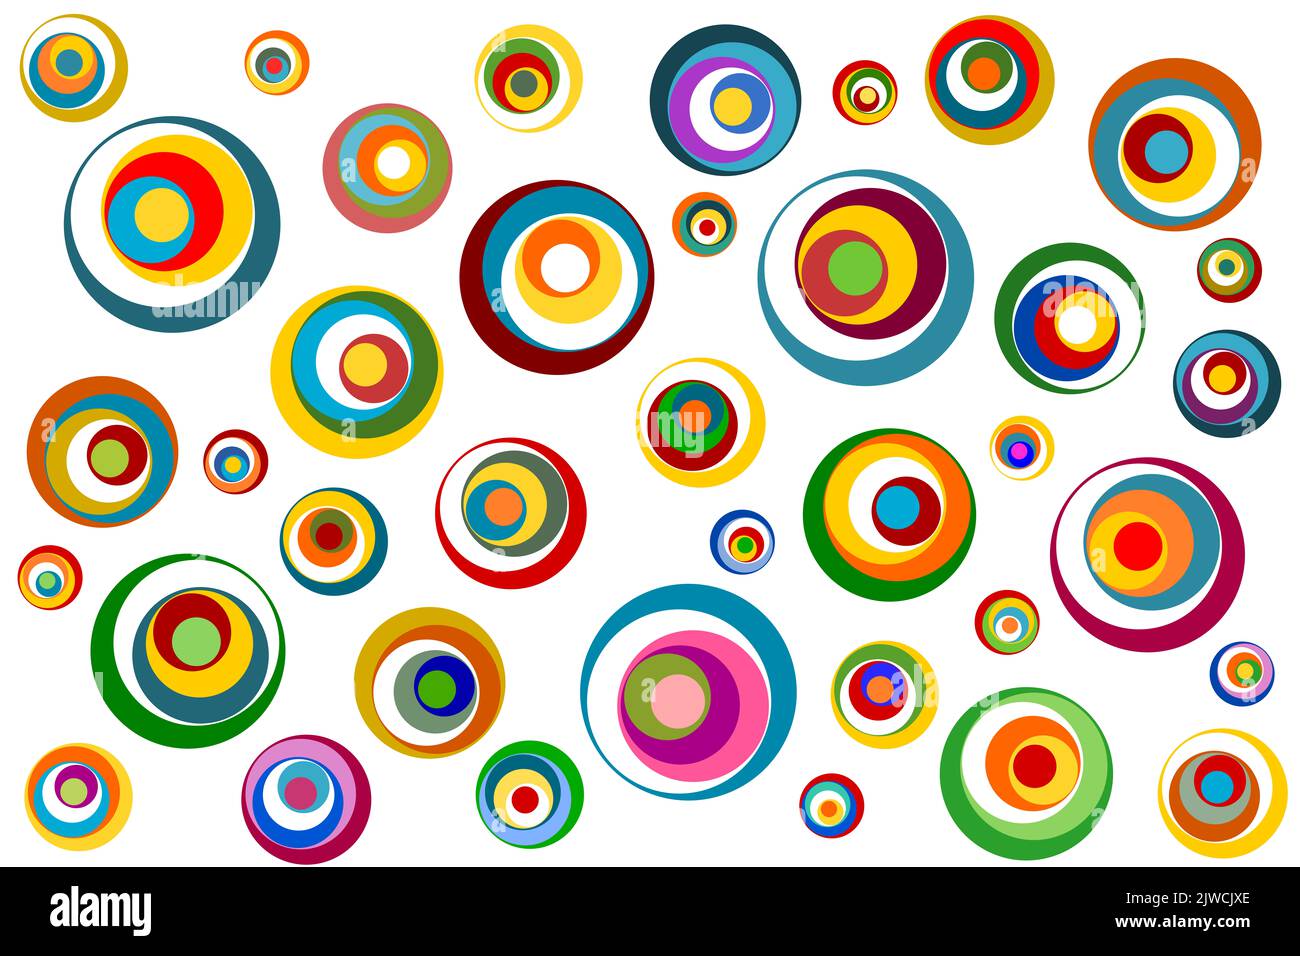 Colourful beads illustration. Wallpaper design with colourful circles. Stock Photo